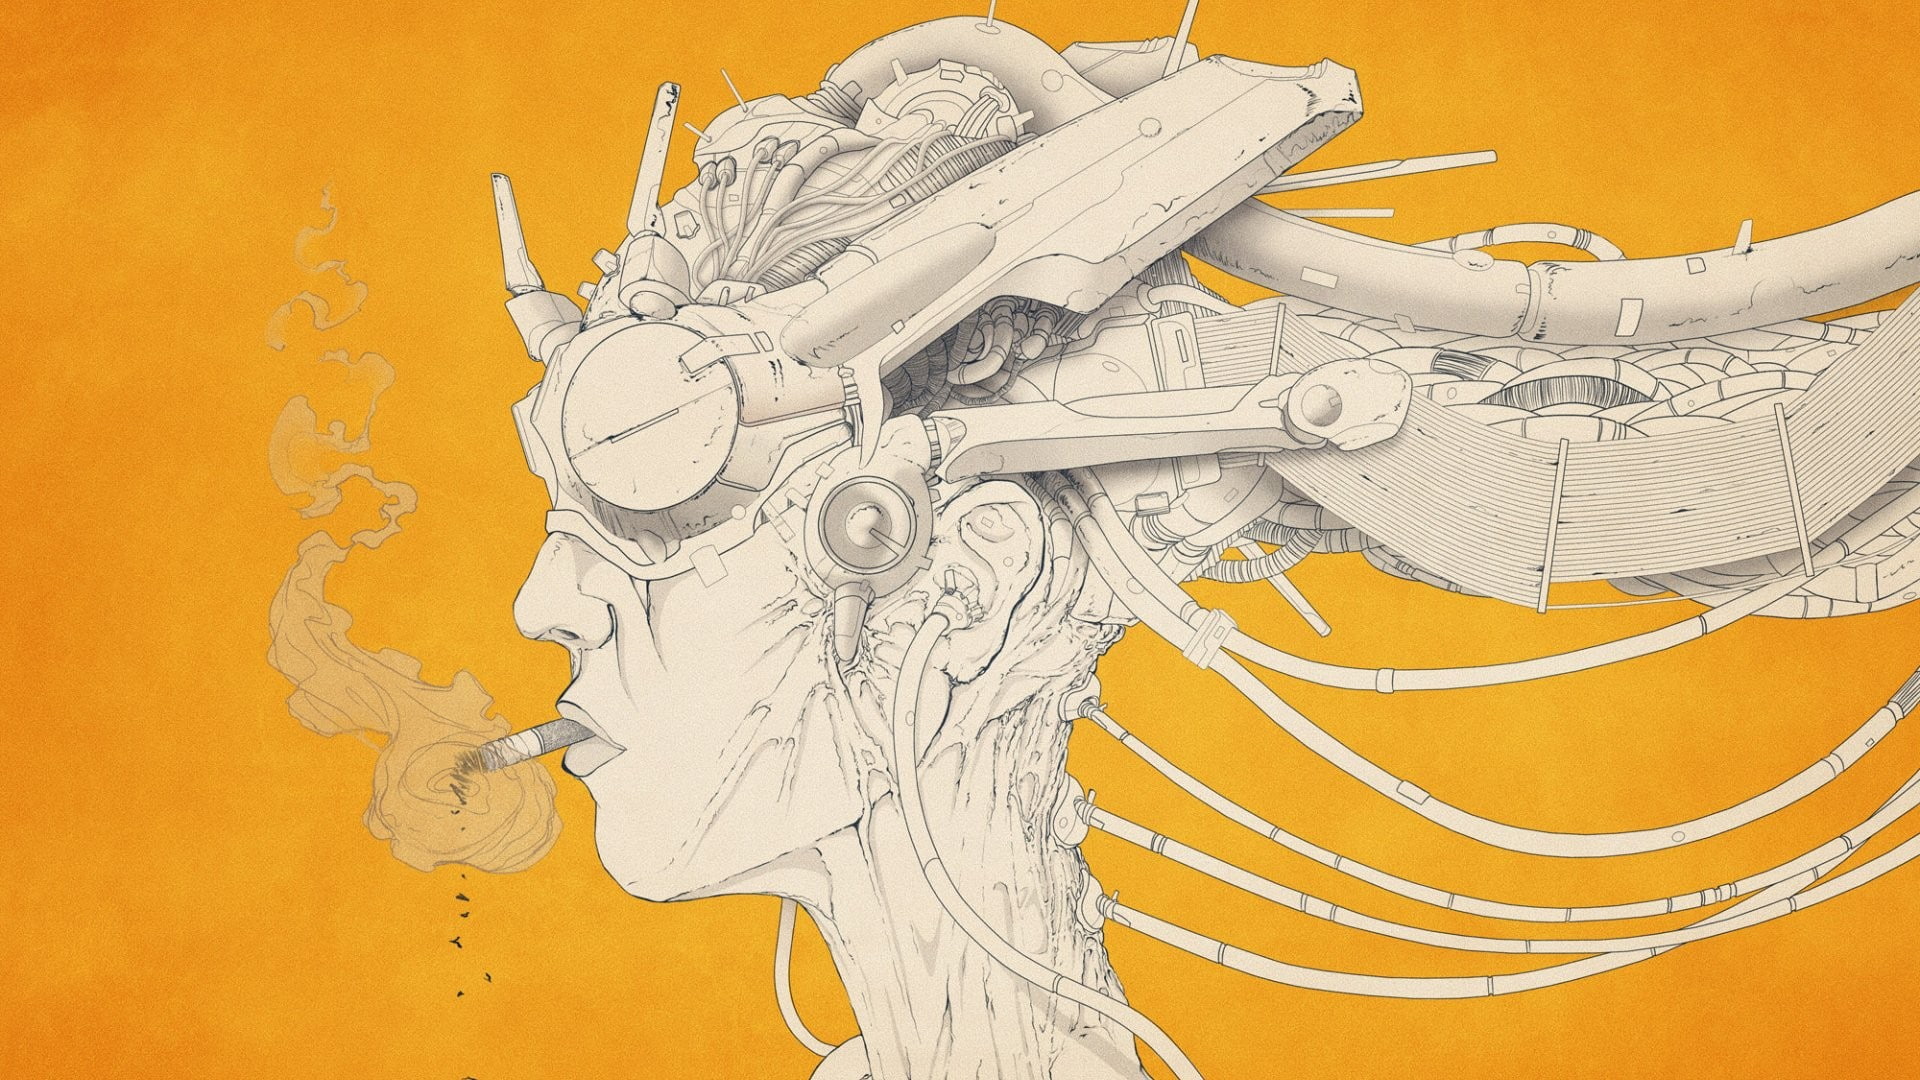 Artwork, Cyborg, Smoking, Simple Background, woman with devices on head with smoking sketch